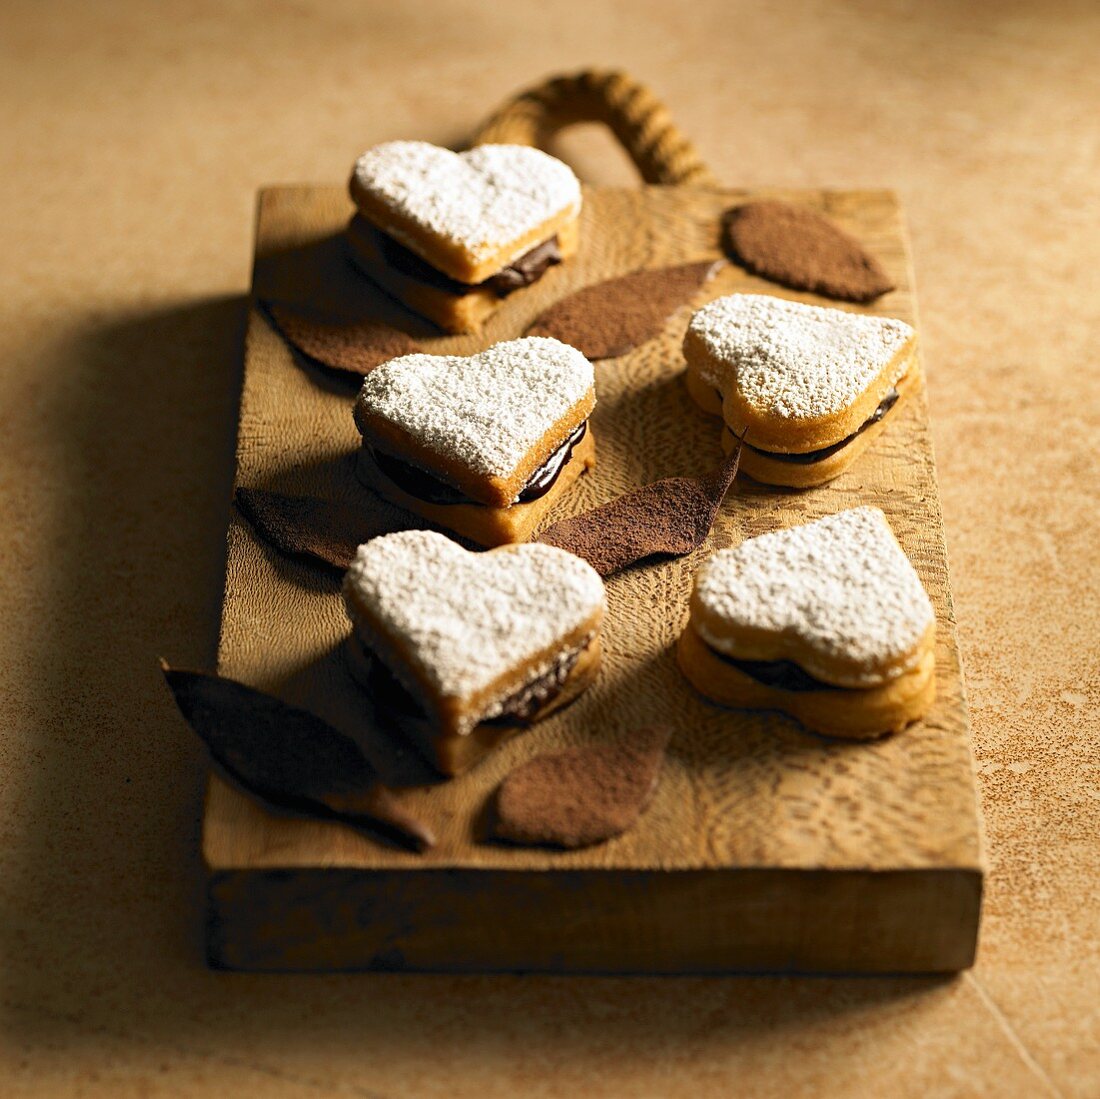 Heart-shaped filled chocolate biscuits